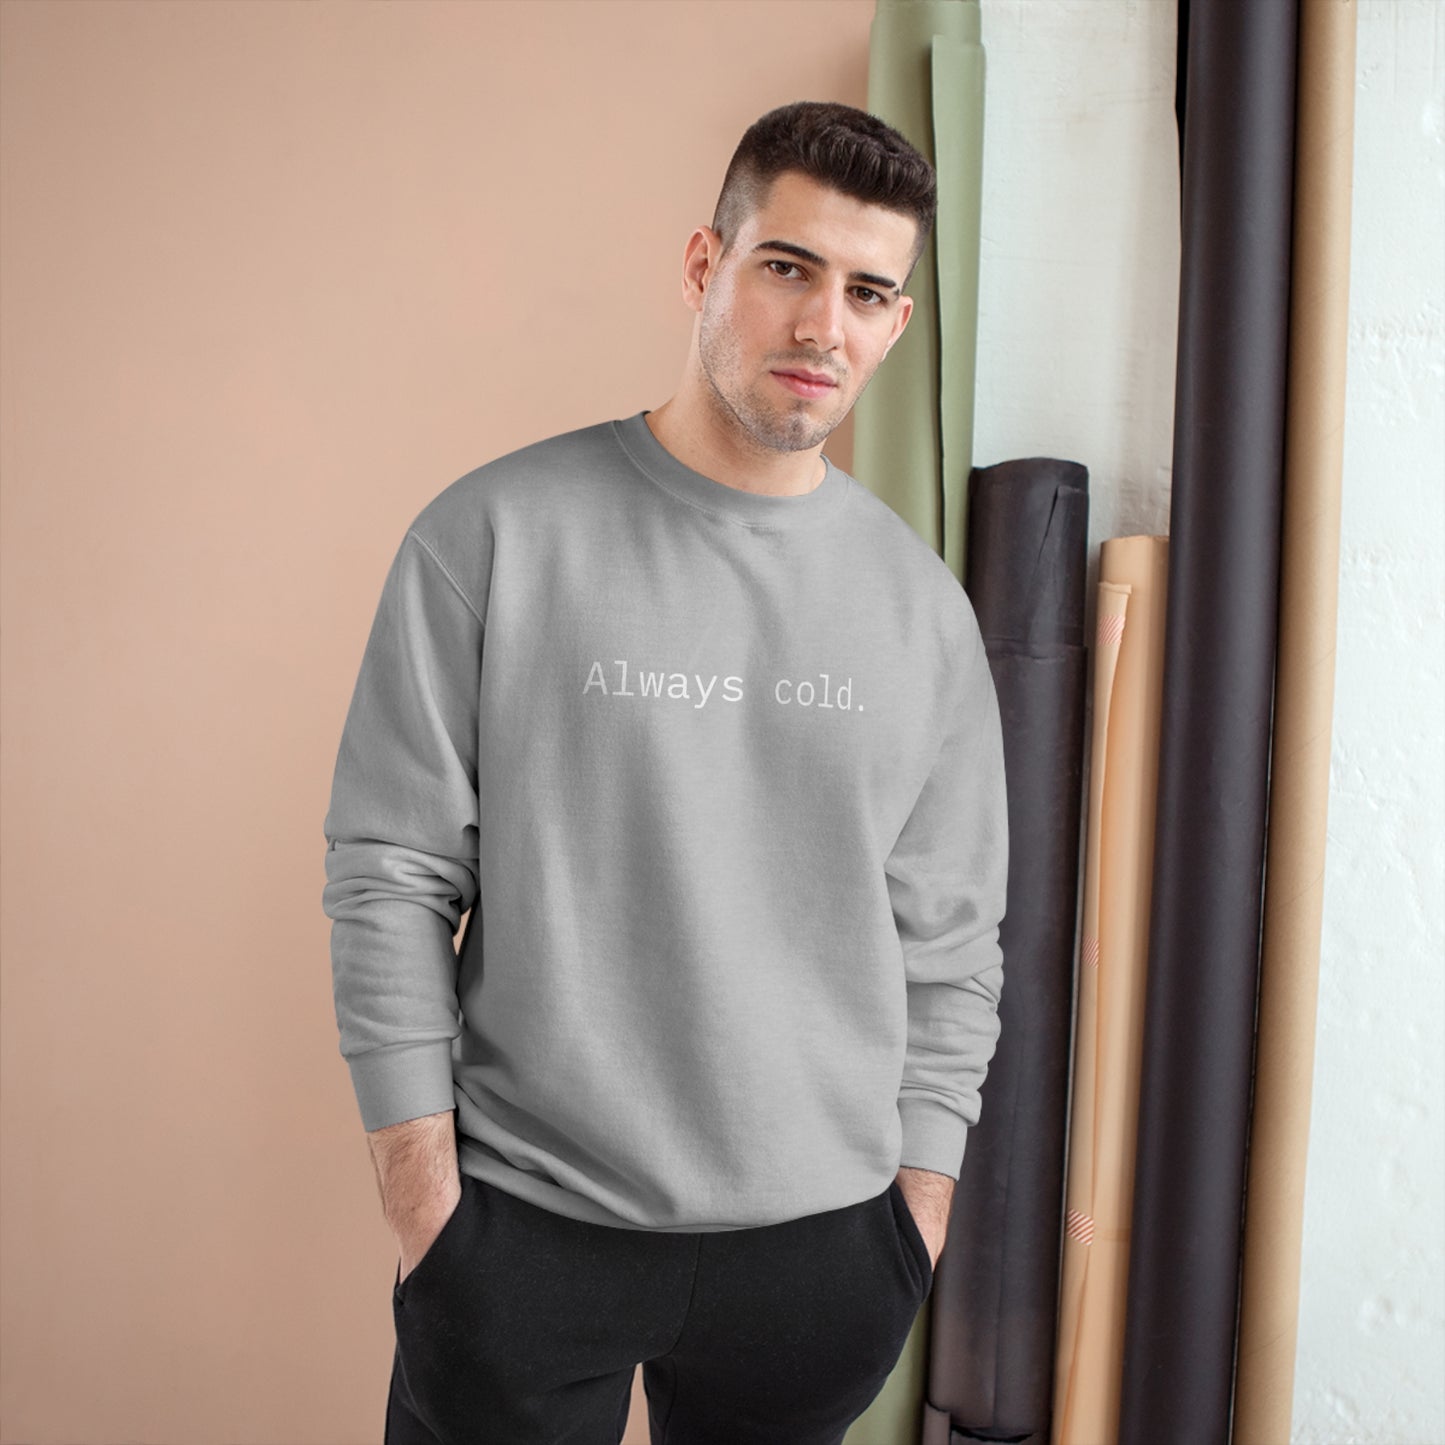 Always cold.  - Champion Eco Crewneck Sweatshirt: Stylish Comfort with Recycled Polyester Blend